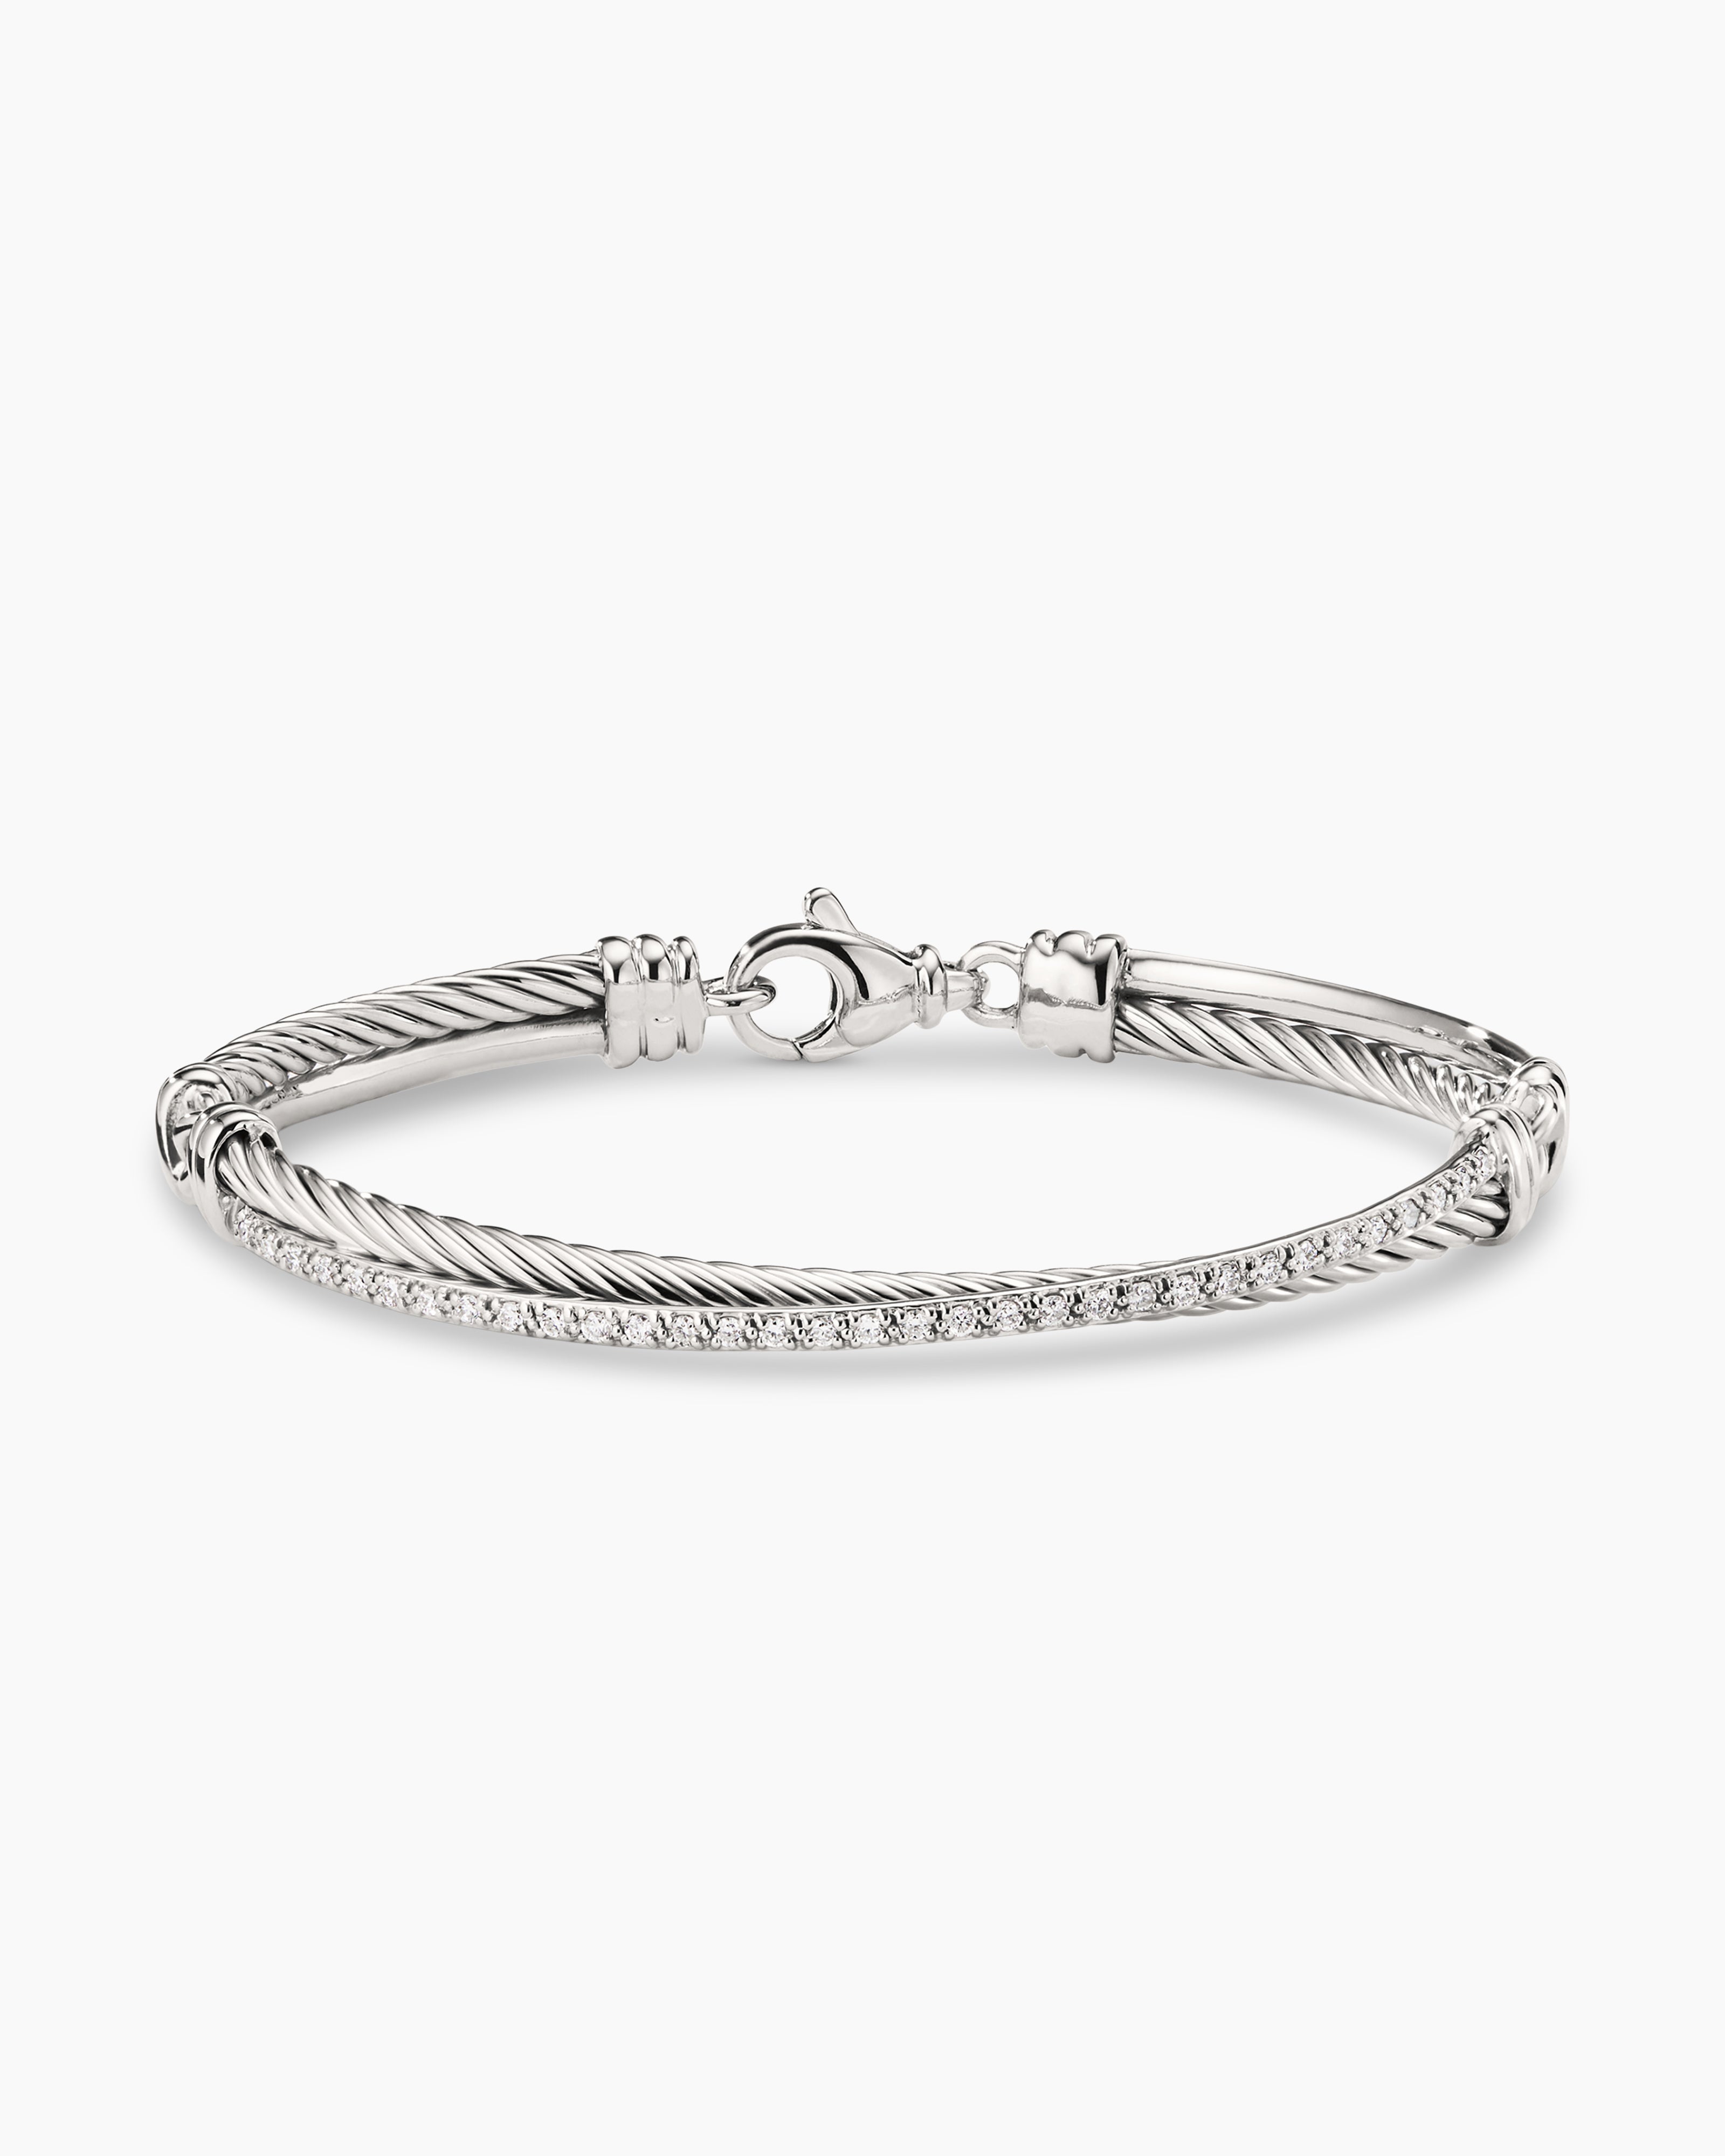 Shine Bright with White Stones and Sterling Silver Bracelet – saffrontrait